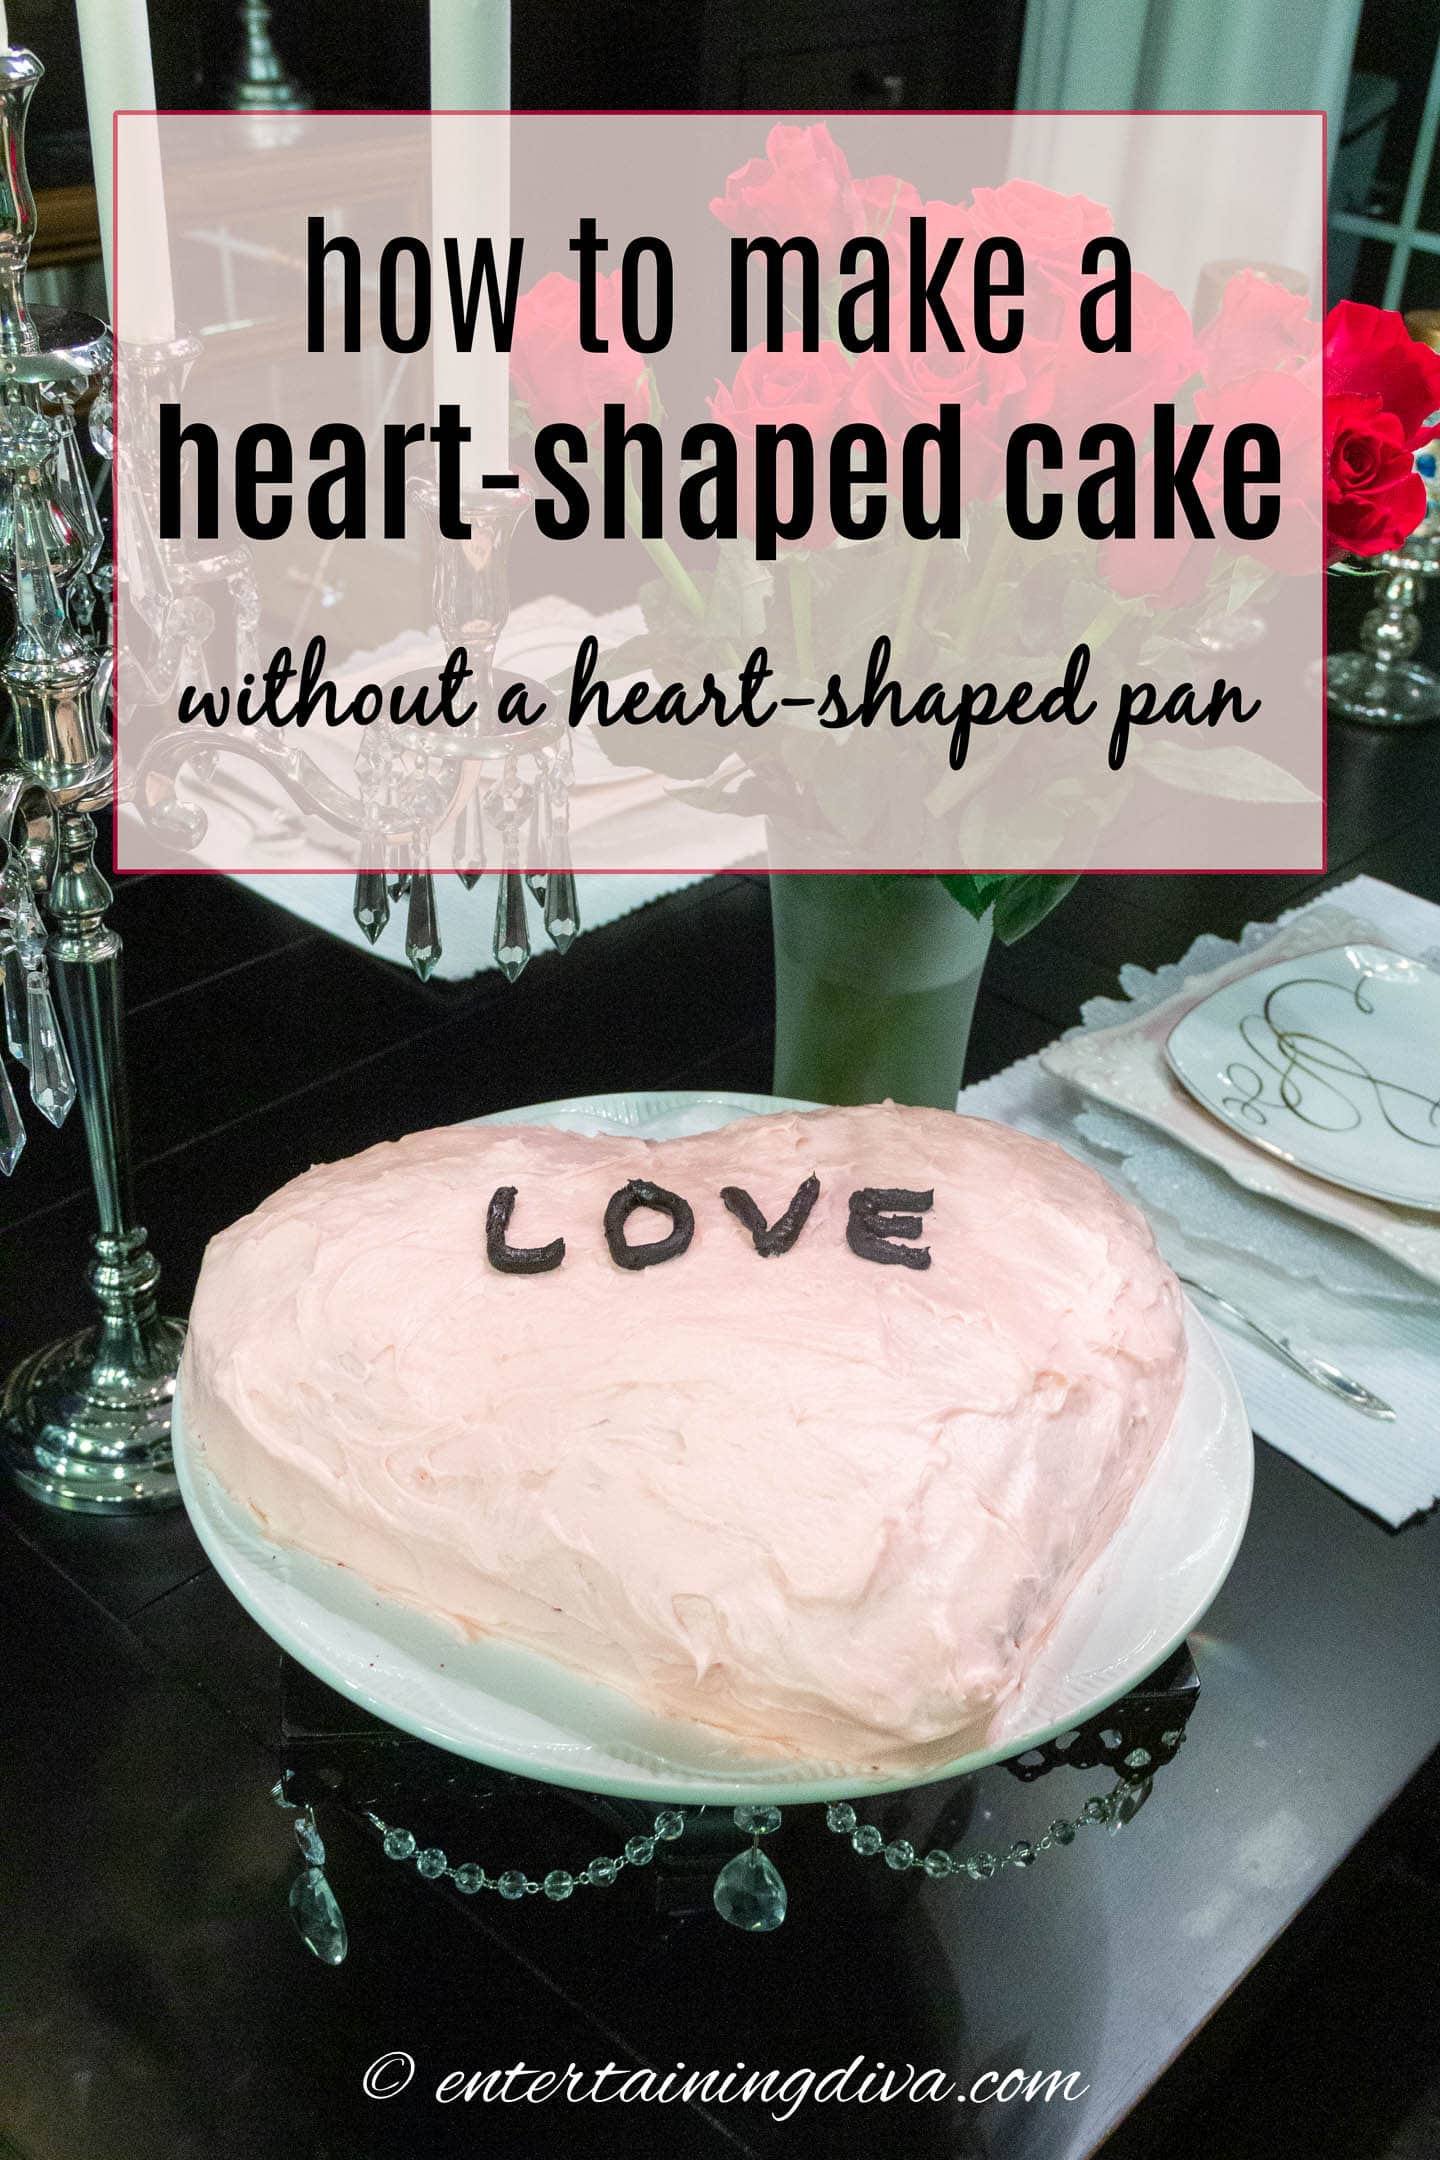 how to make a heart-shaped cake without a heart-shaped pan